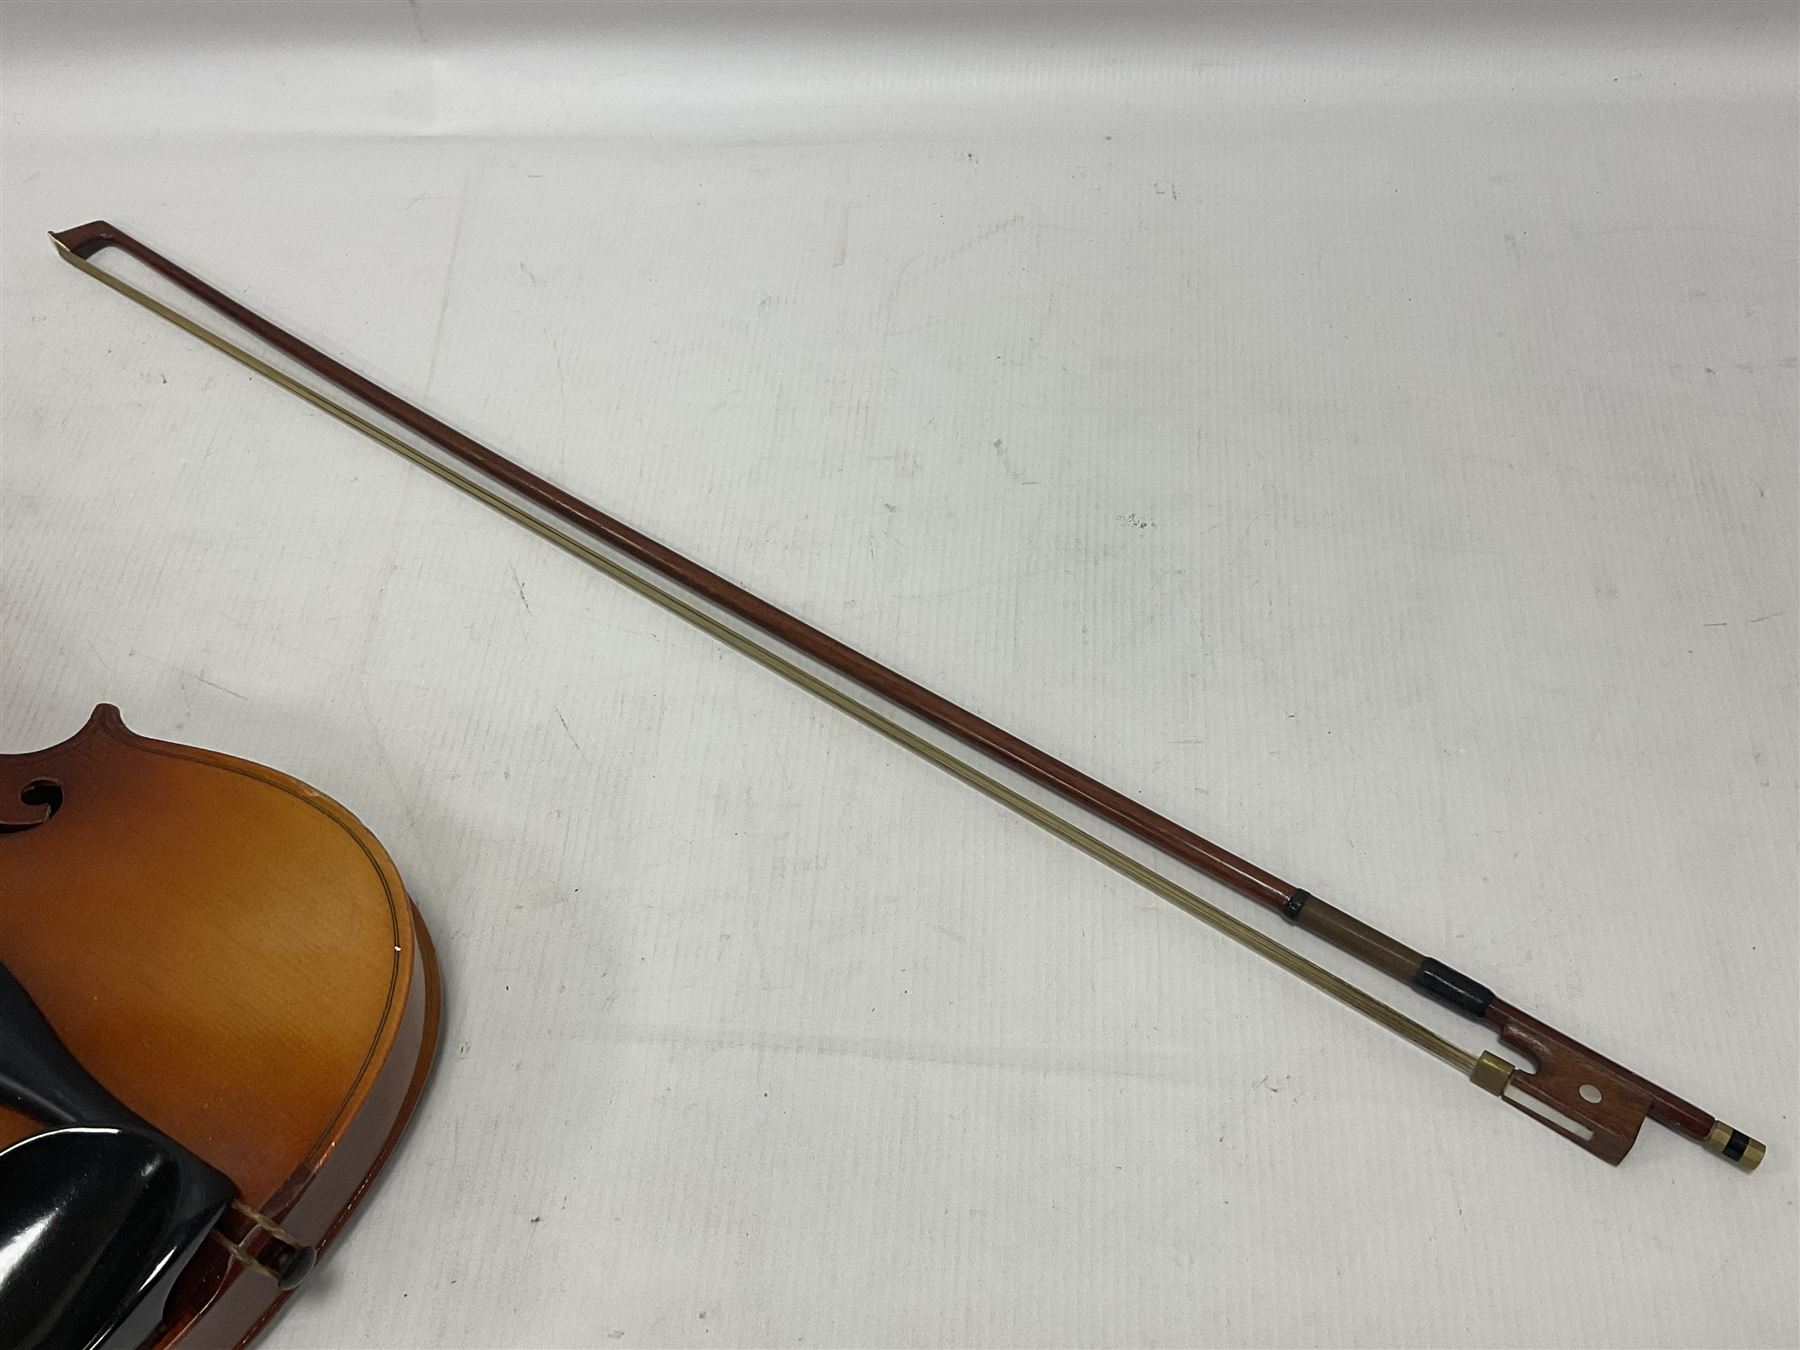 Full size violin with a maple back and ribs - Image 21 of 21